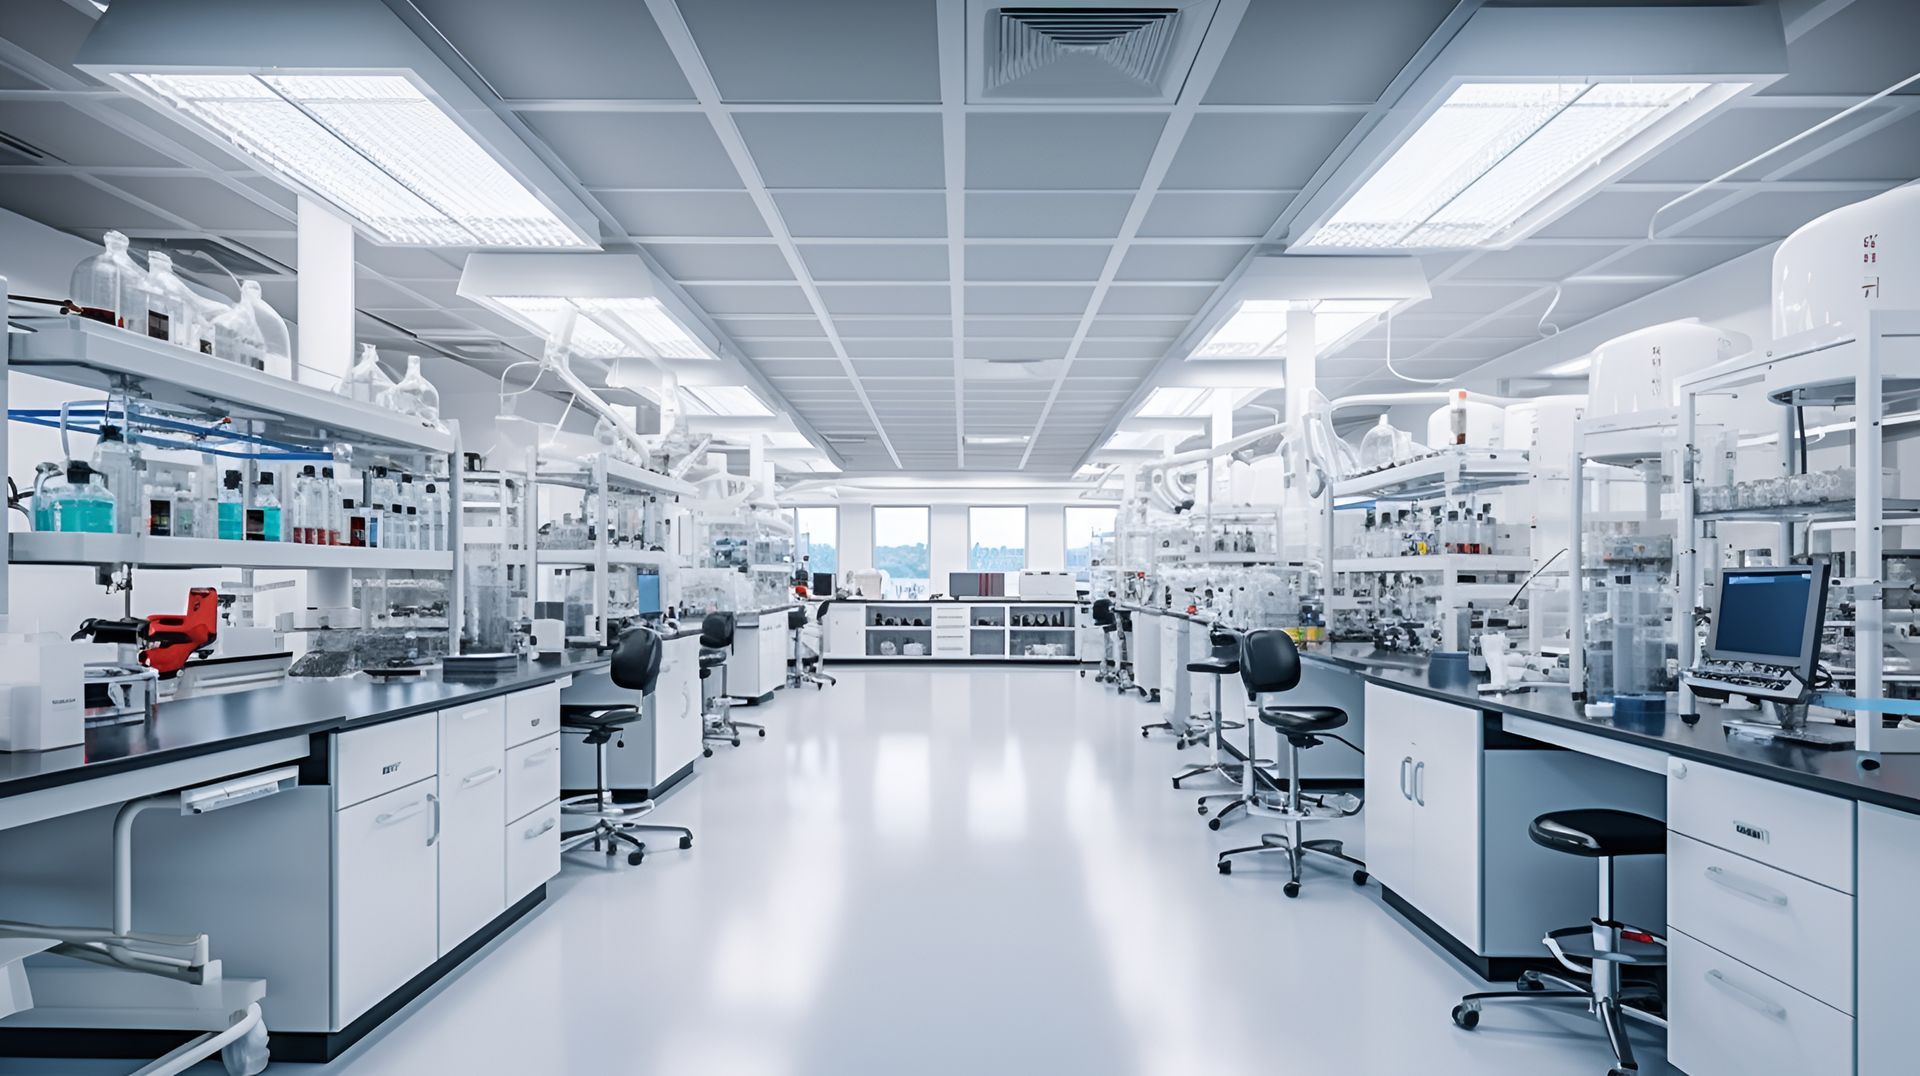 The Reconditioned Instrument Option: When is it a Smart Choice for Laboratories?